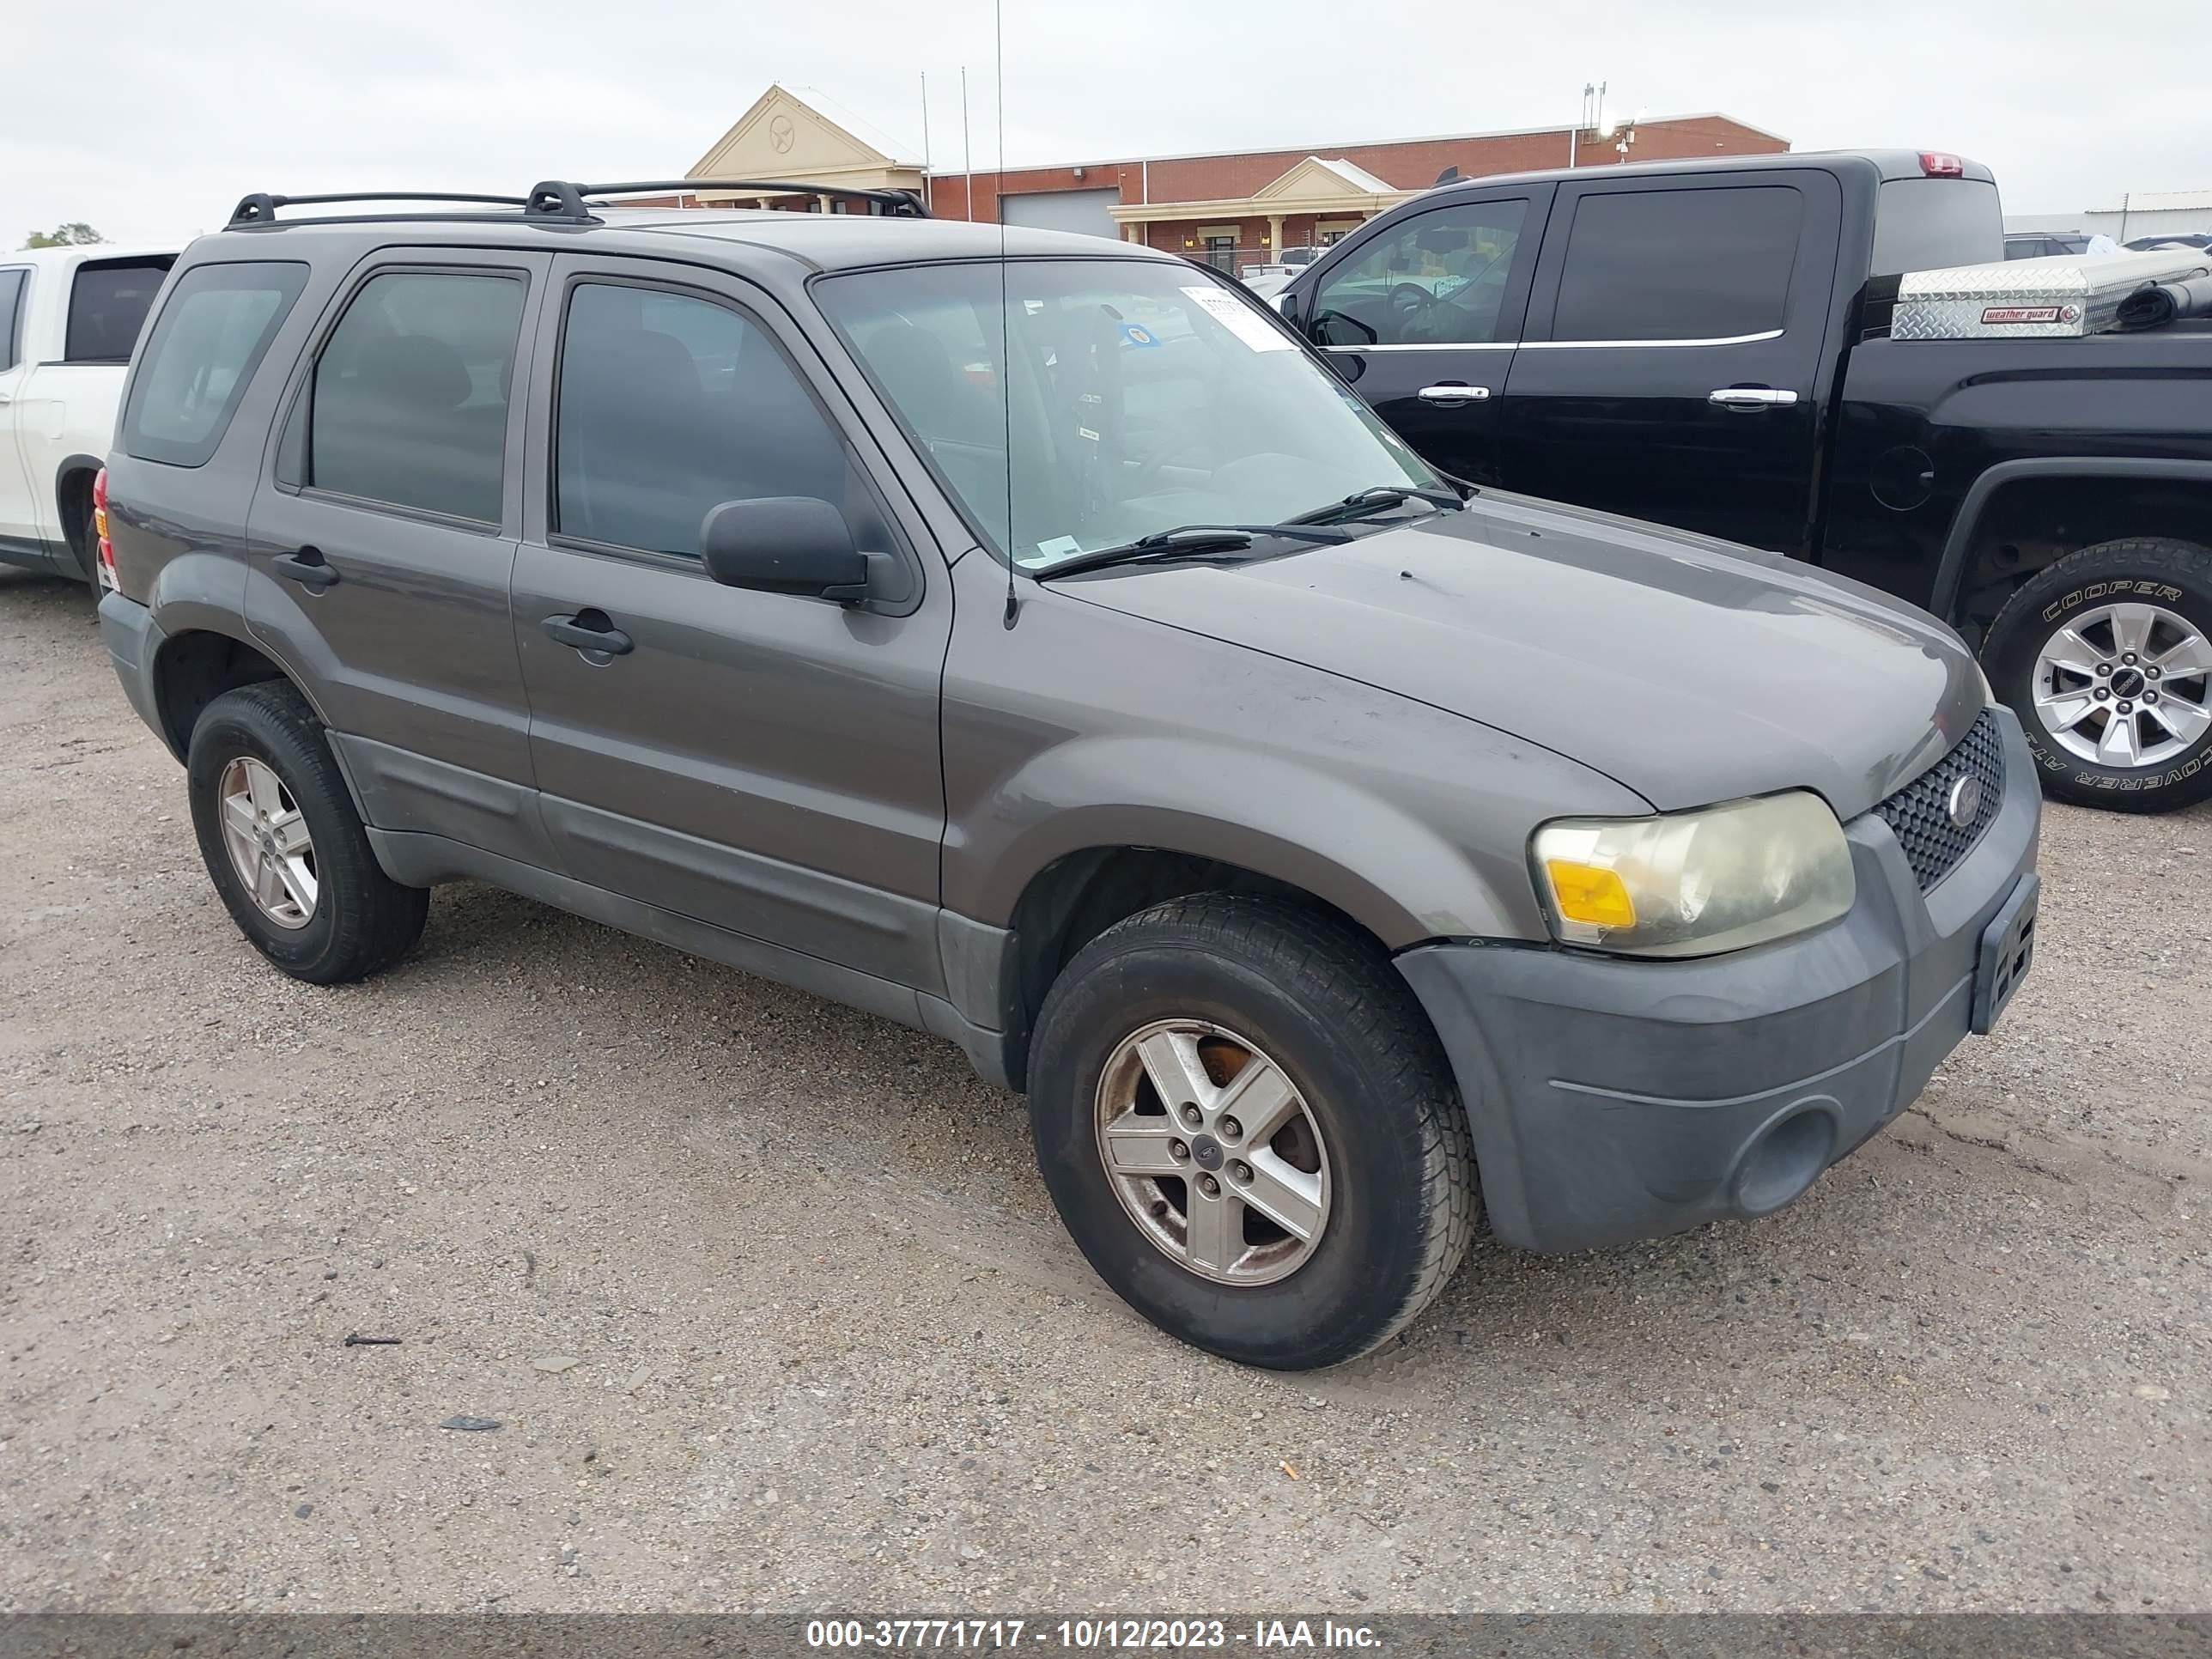 vin: 1FMYU02Z85KC11103 1FMYU02Z85KC11103 2005 ford escape 2300 for Sale in 75172, 204 Mars Rd, Wilmer, Texas, USA